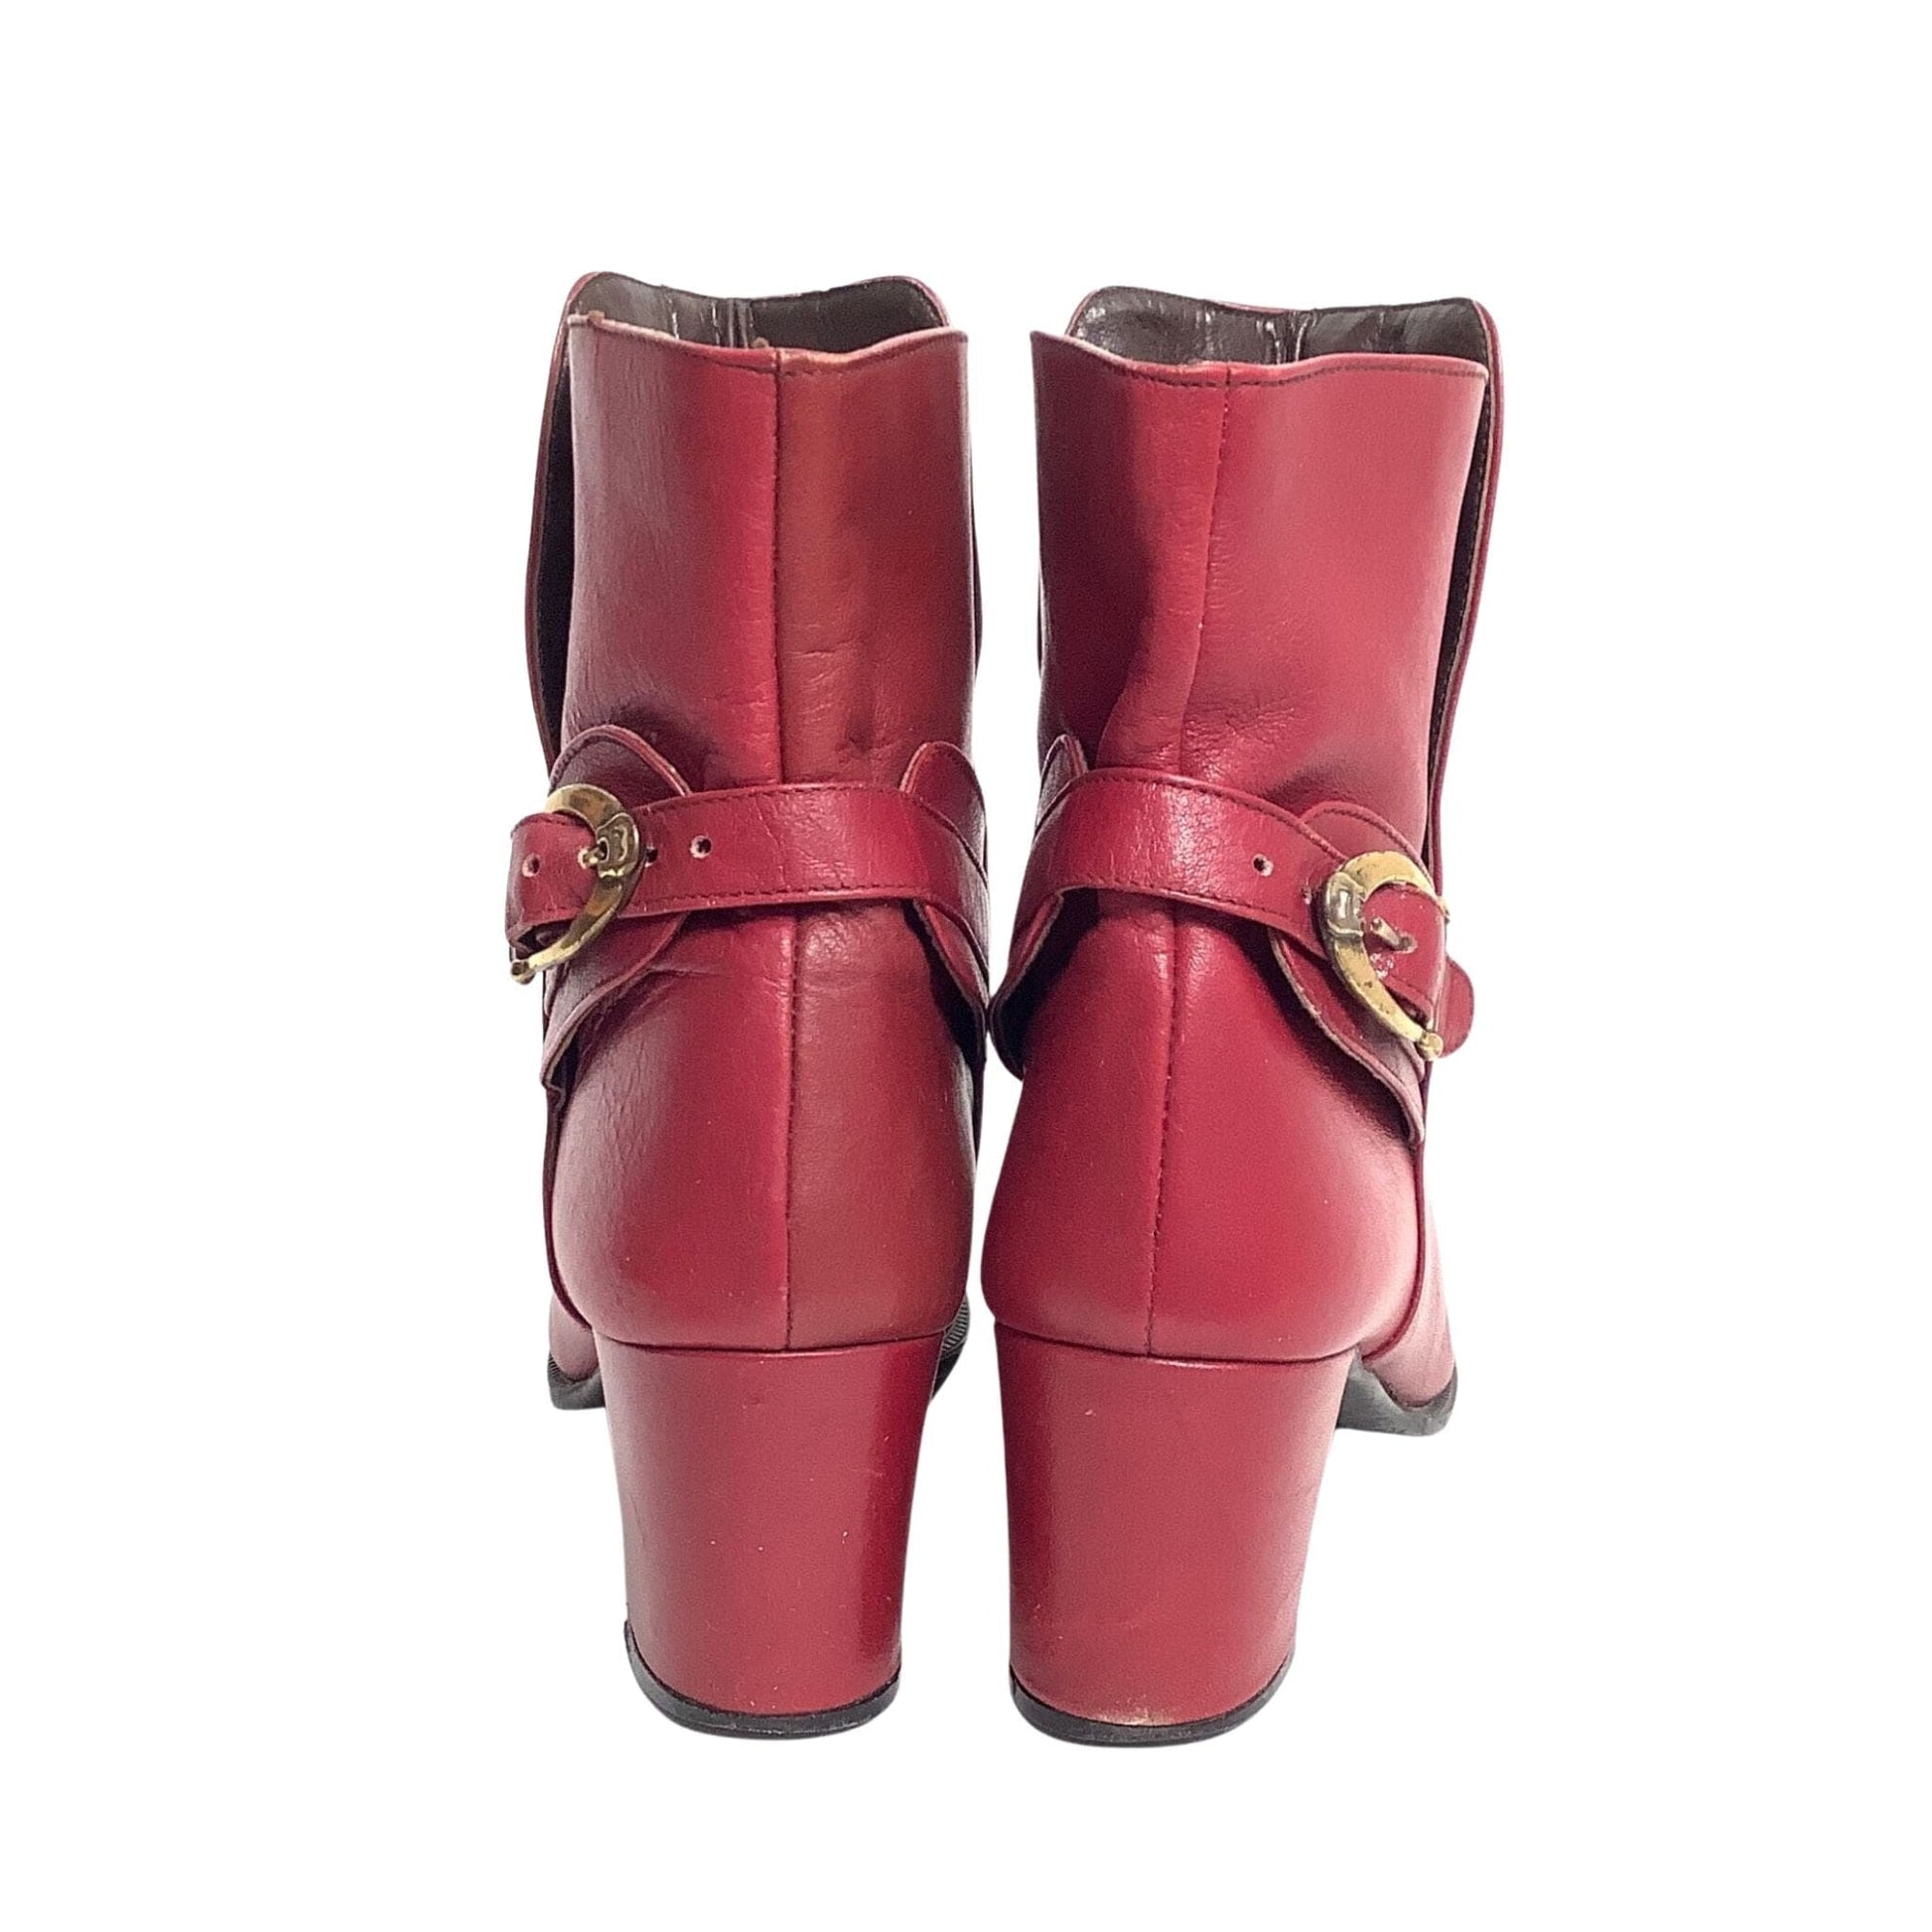 1990s Leather Ankle Boots 7 / Burgundy / Vintage 1990s